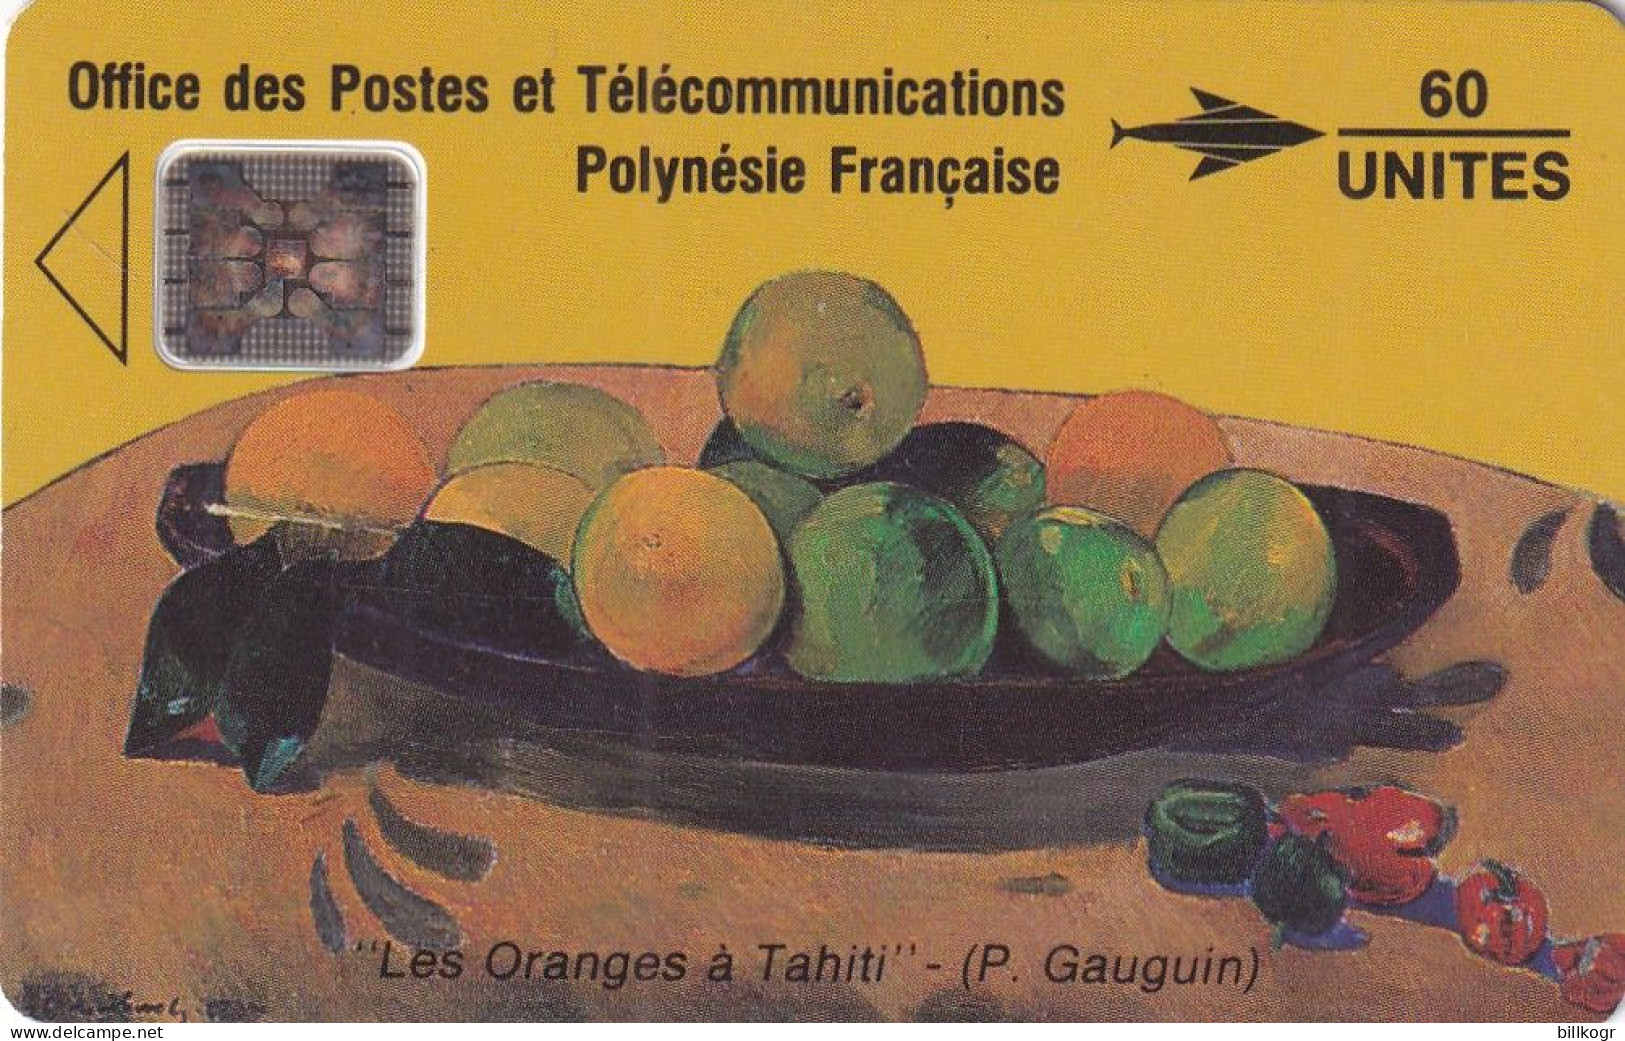 FRENCH POLYNESIA - Les Oranges, Painting/Gauguin(60 Units), Tirage %20000, 10/91, Used - Polynésie Française